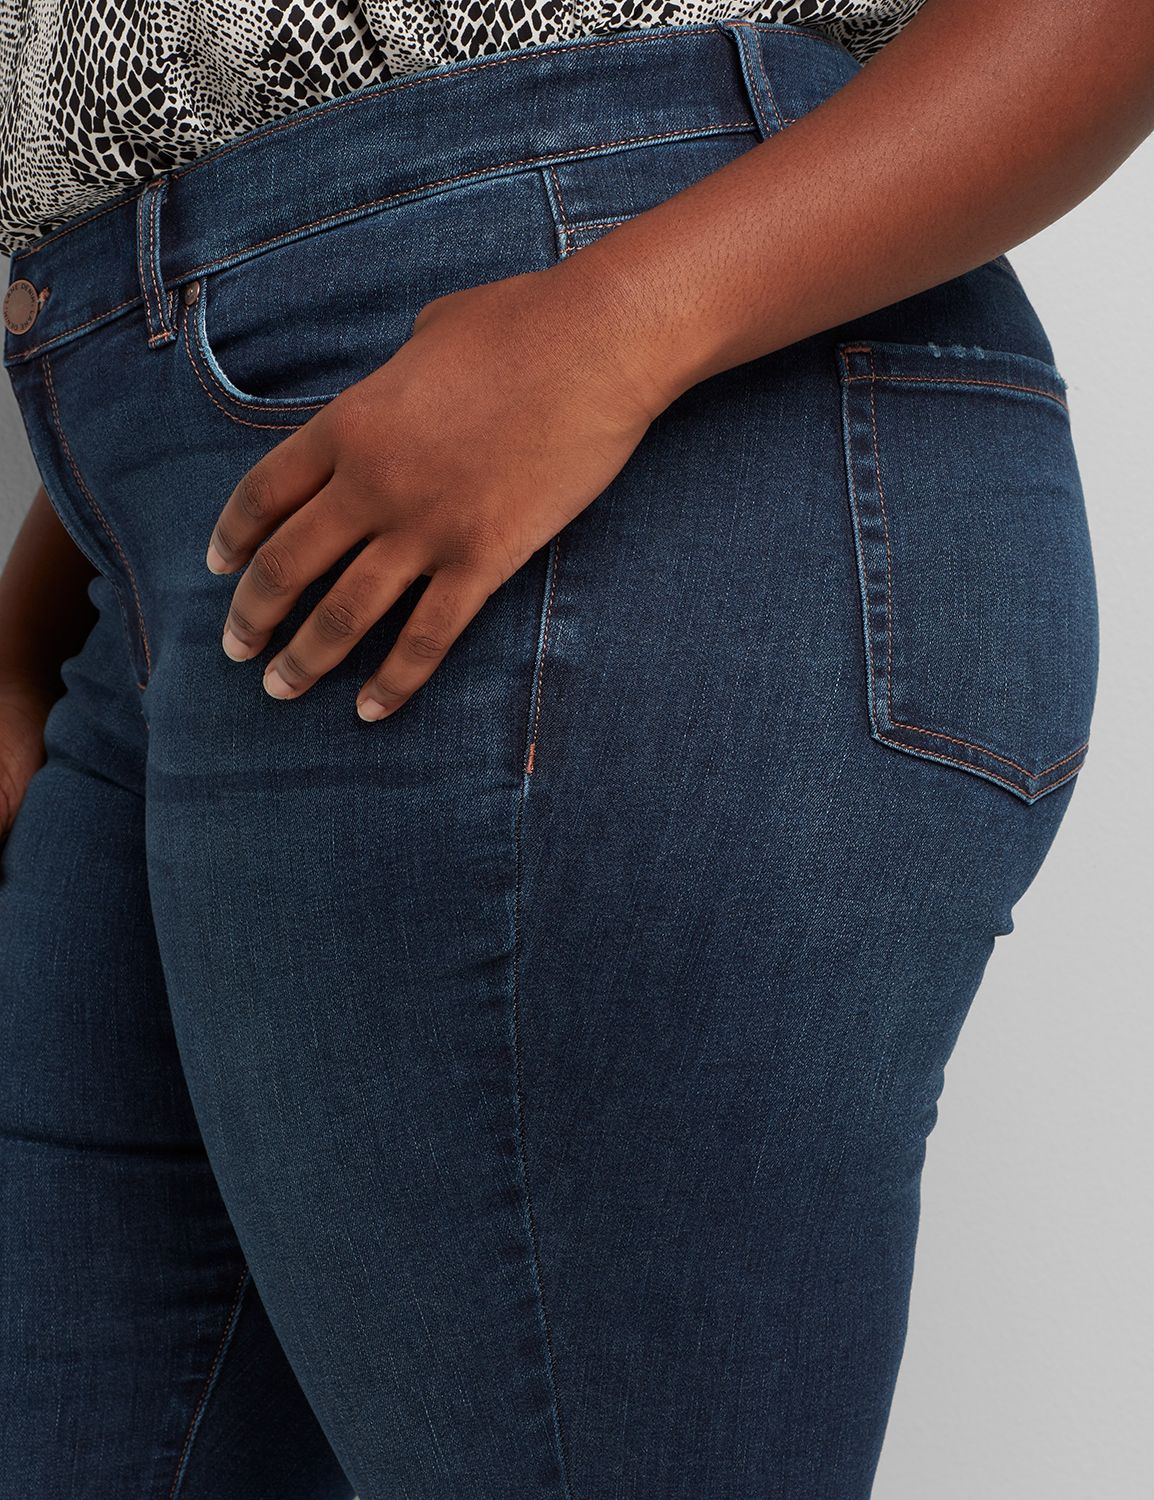 Lane Bryant Flex Magic Waistband Jeans Are Ideal For Ladies Over 40